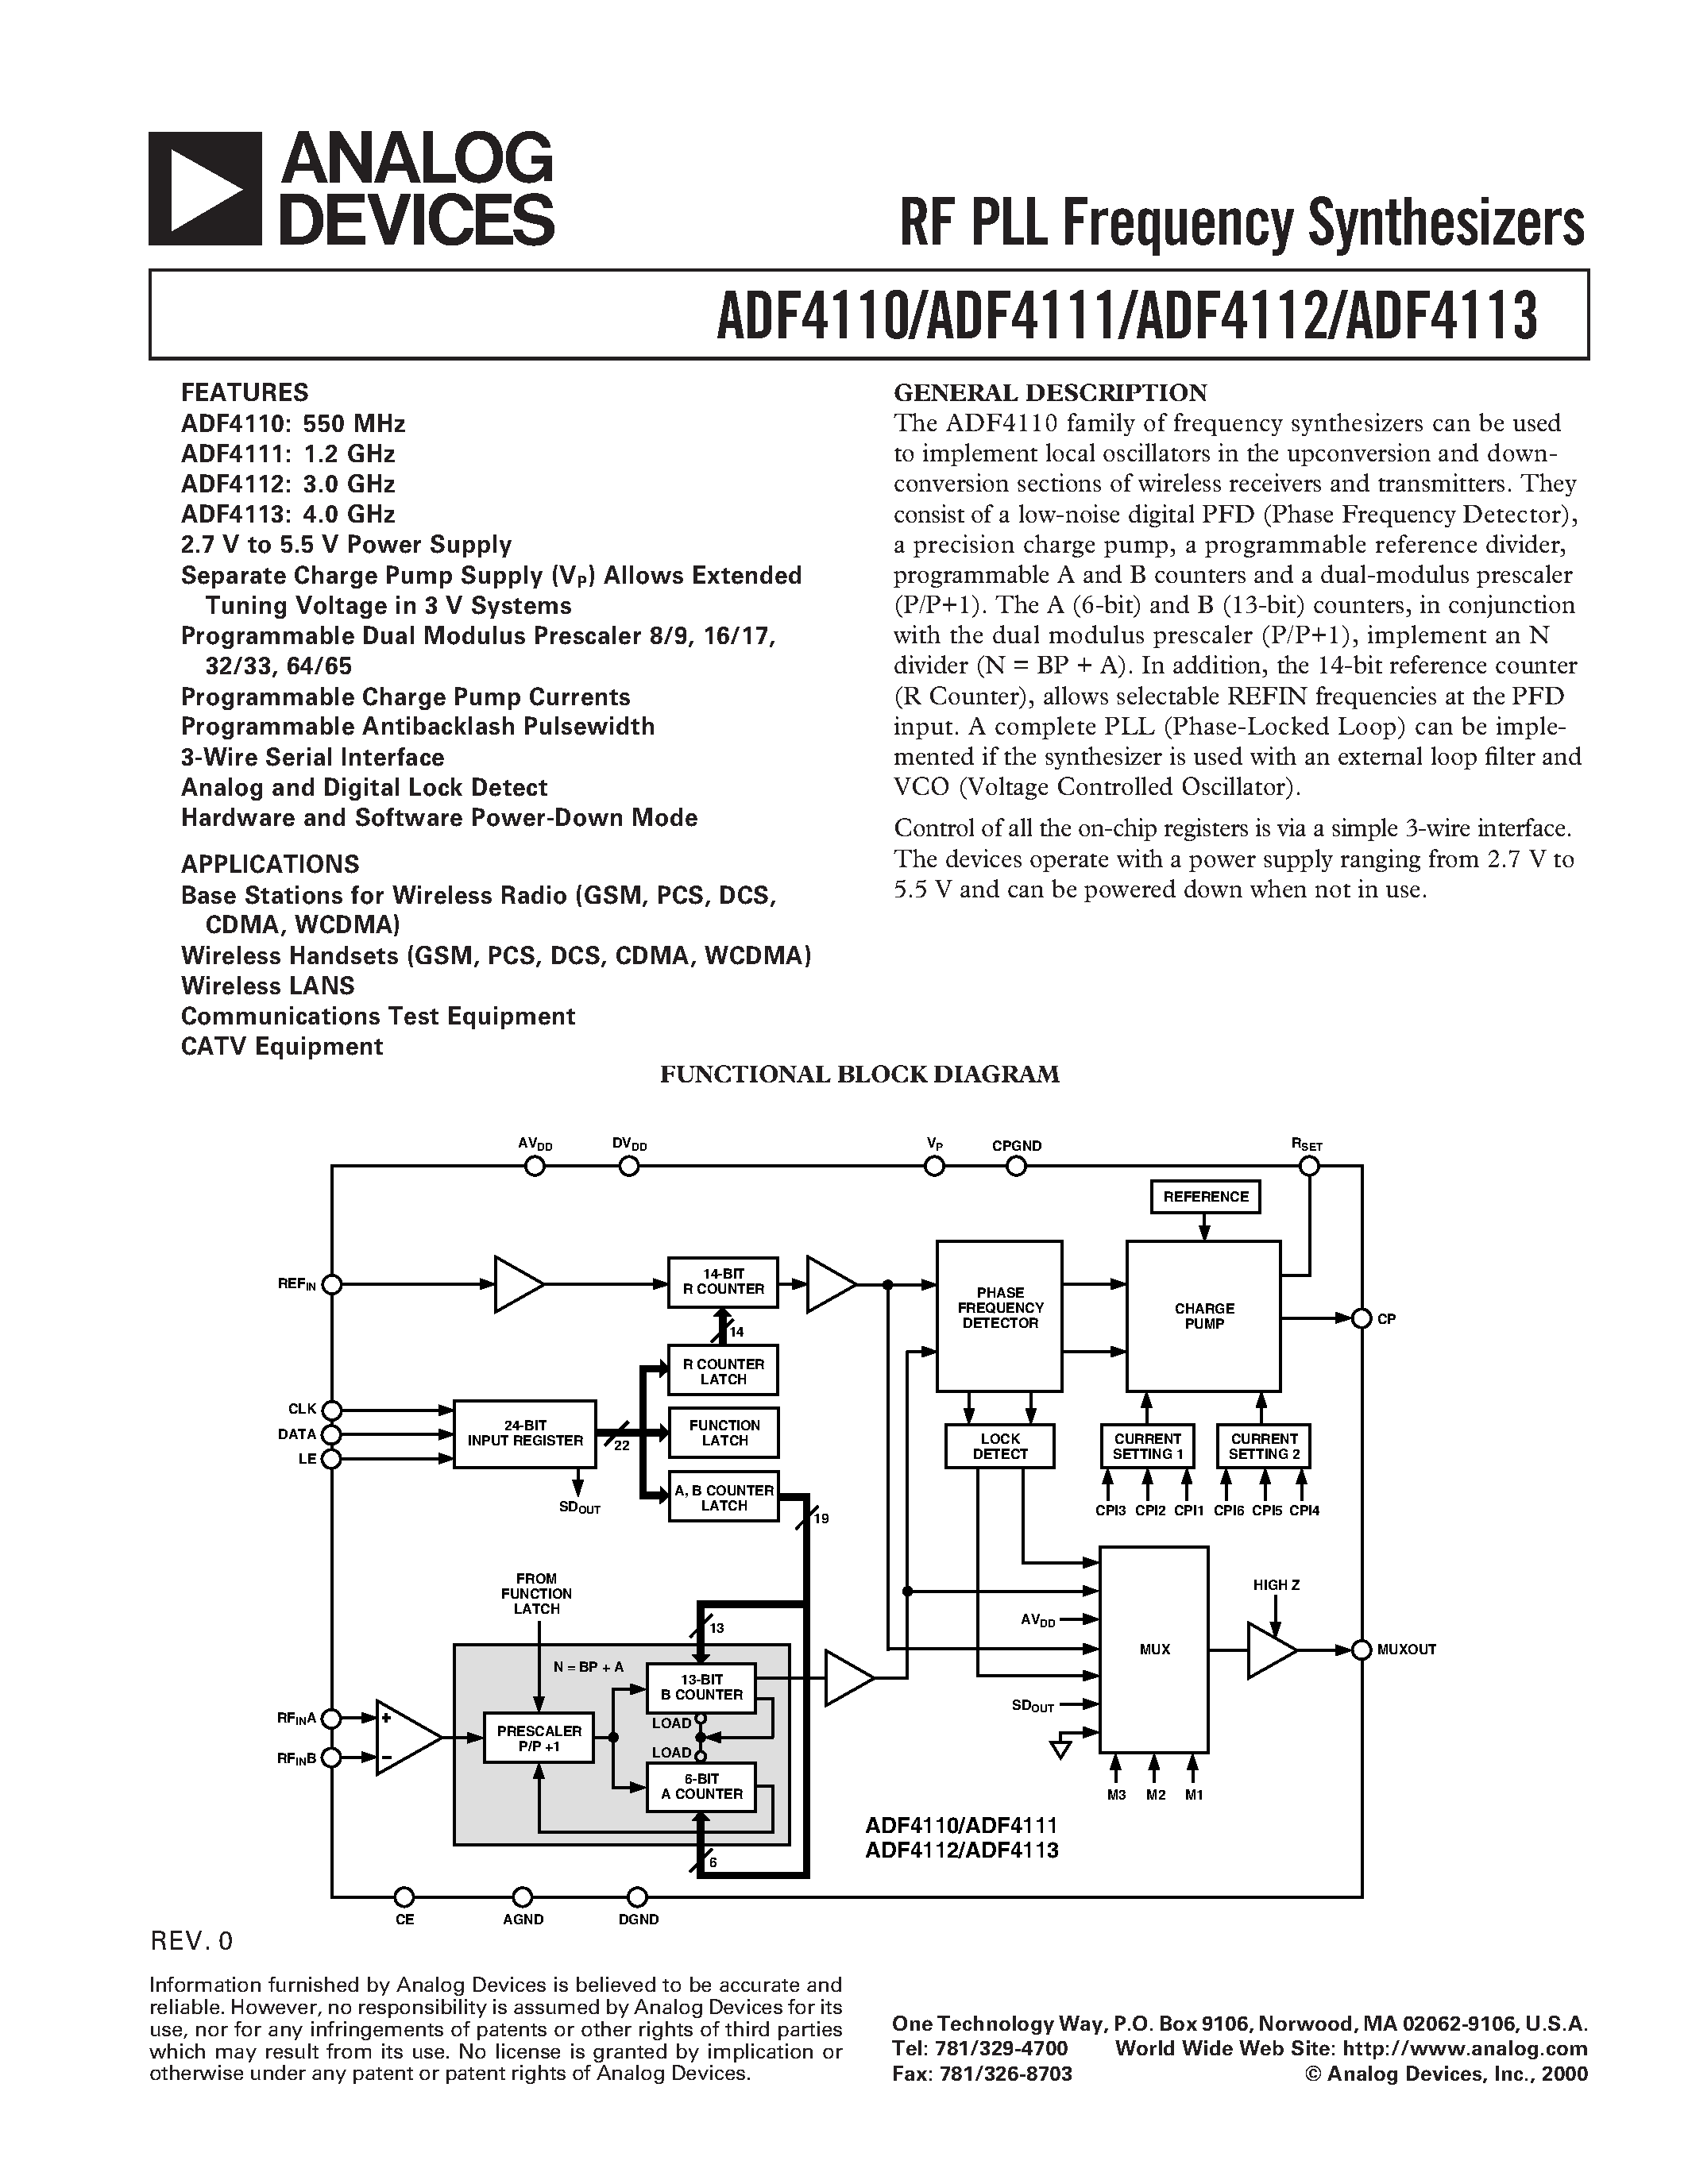 Даташит ADF4113BCHIPS - RF PLL Frequency Synthesizers страница 1